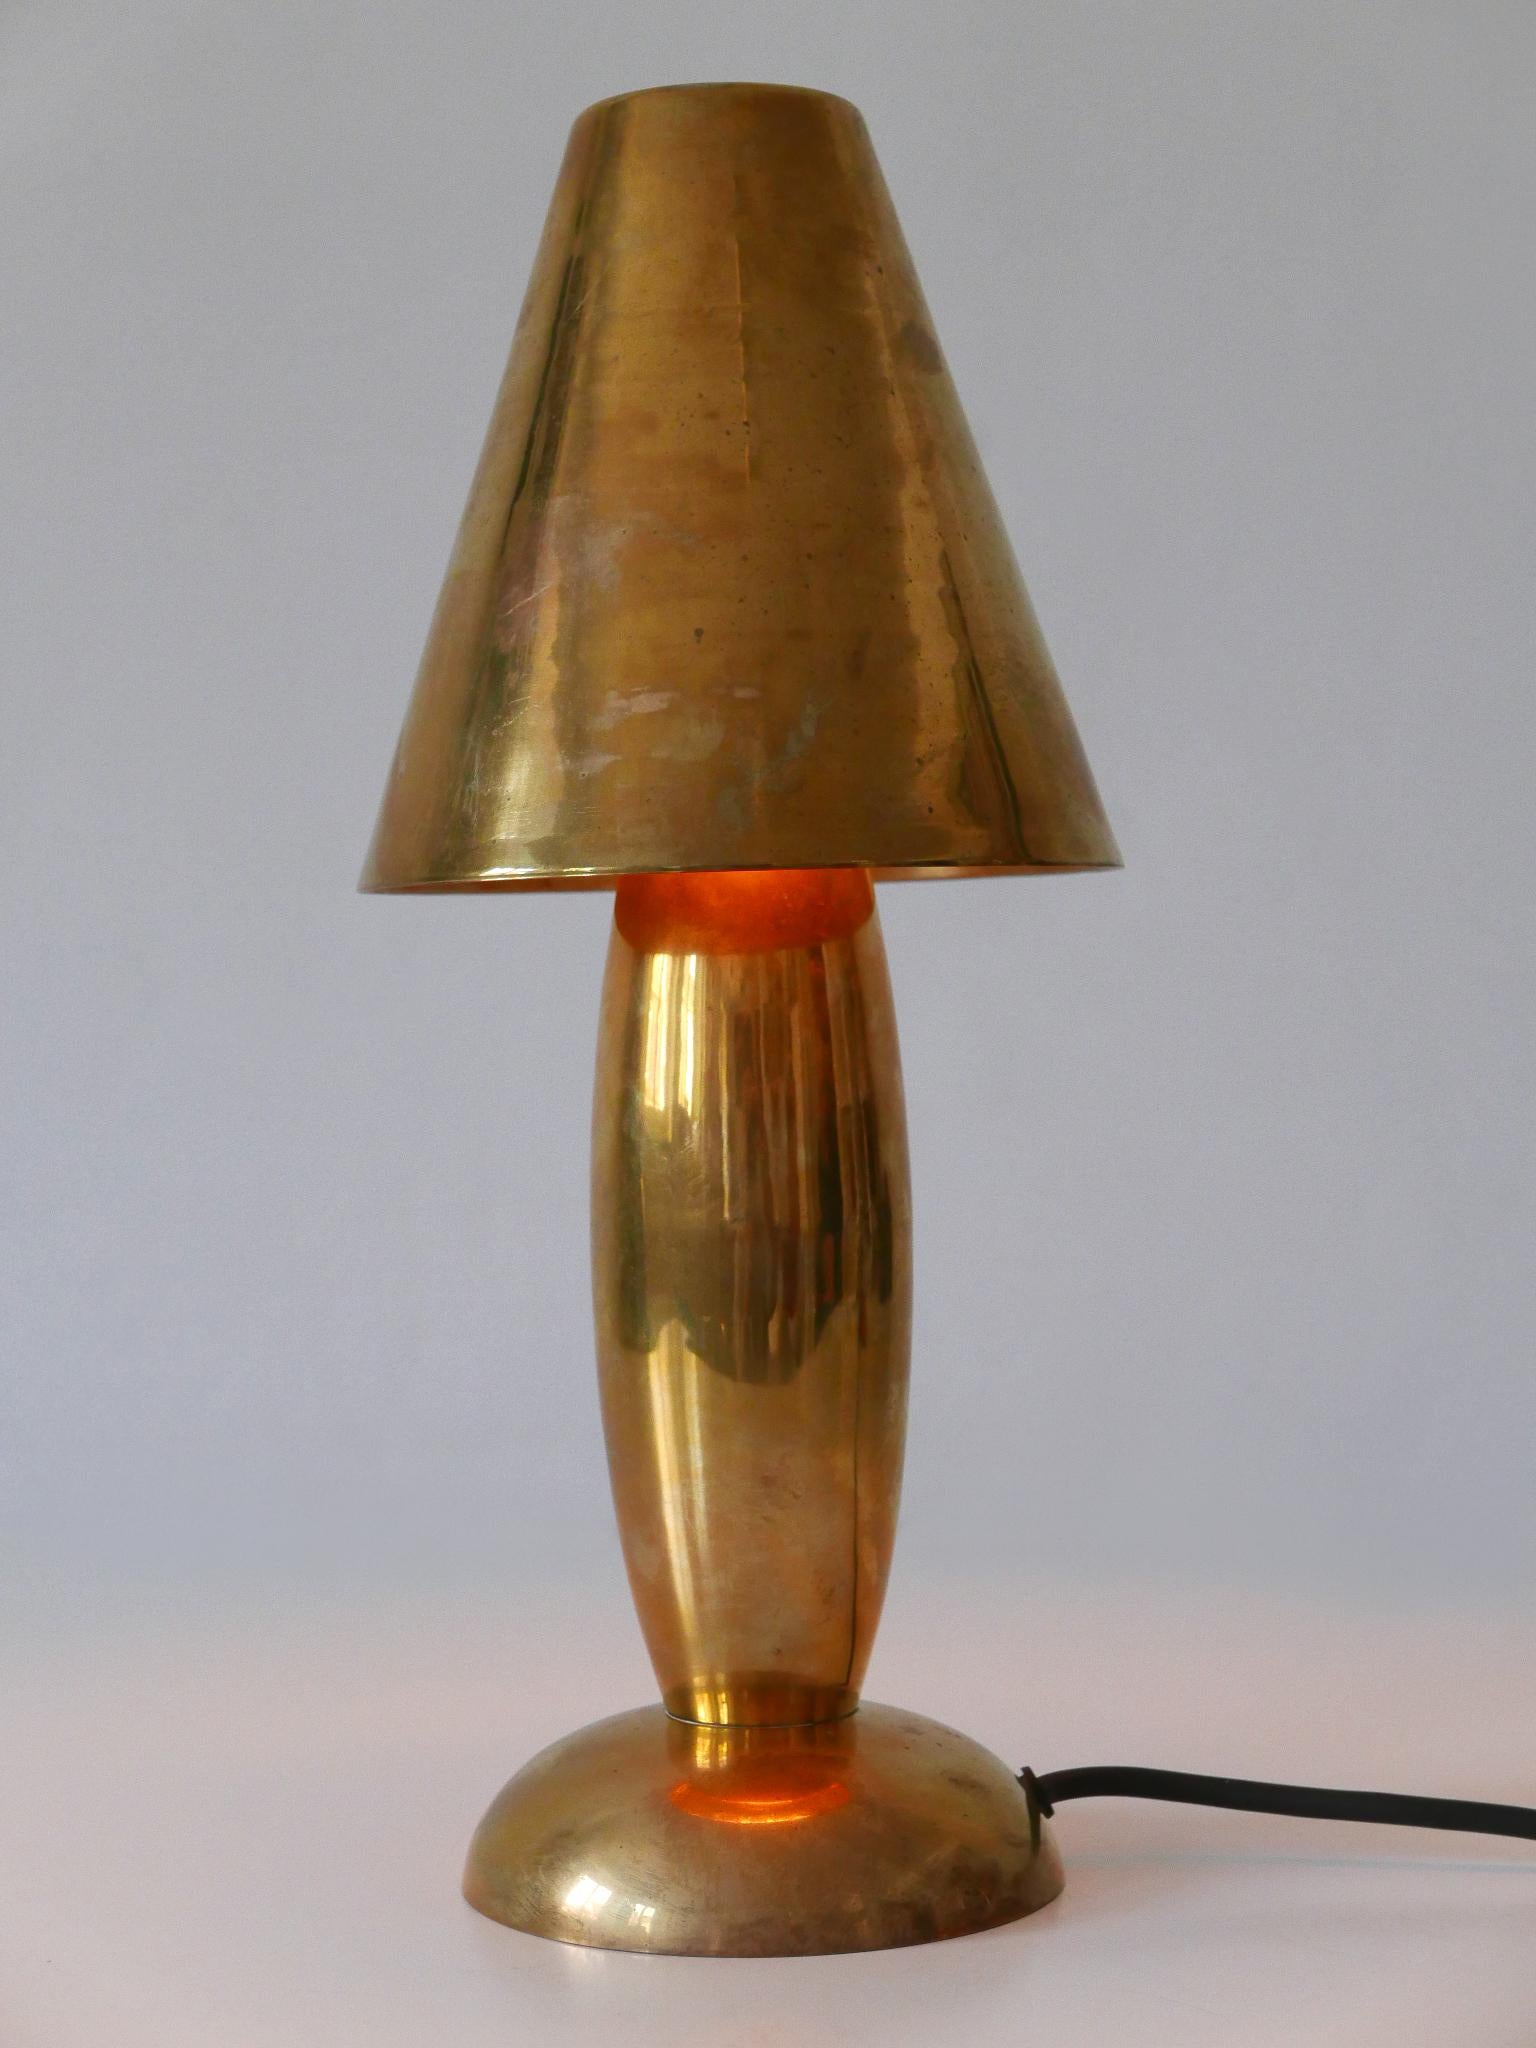 Rare and elegant Mid-Century Modern side table lamp with removable shade. Designed and manufactured by Günther Lambert, Germany, 1970s.

Executed in heavy and solid brass, the lamp comes with 1 x E14 / E12 Edison screw fit bulb socket, is wired, in